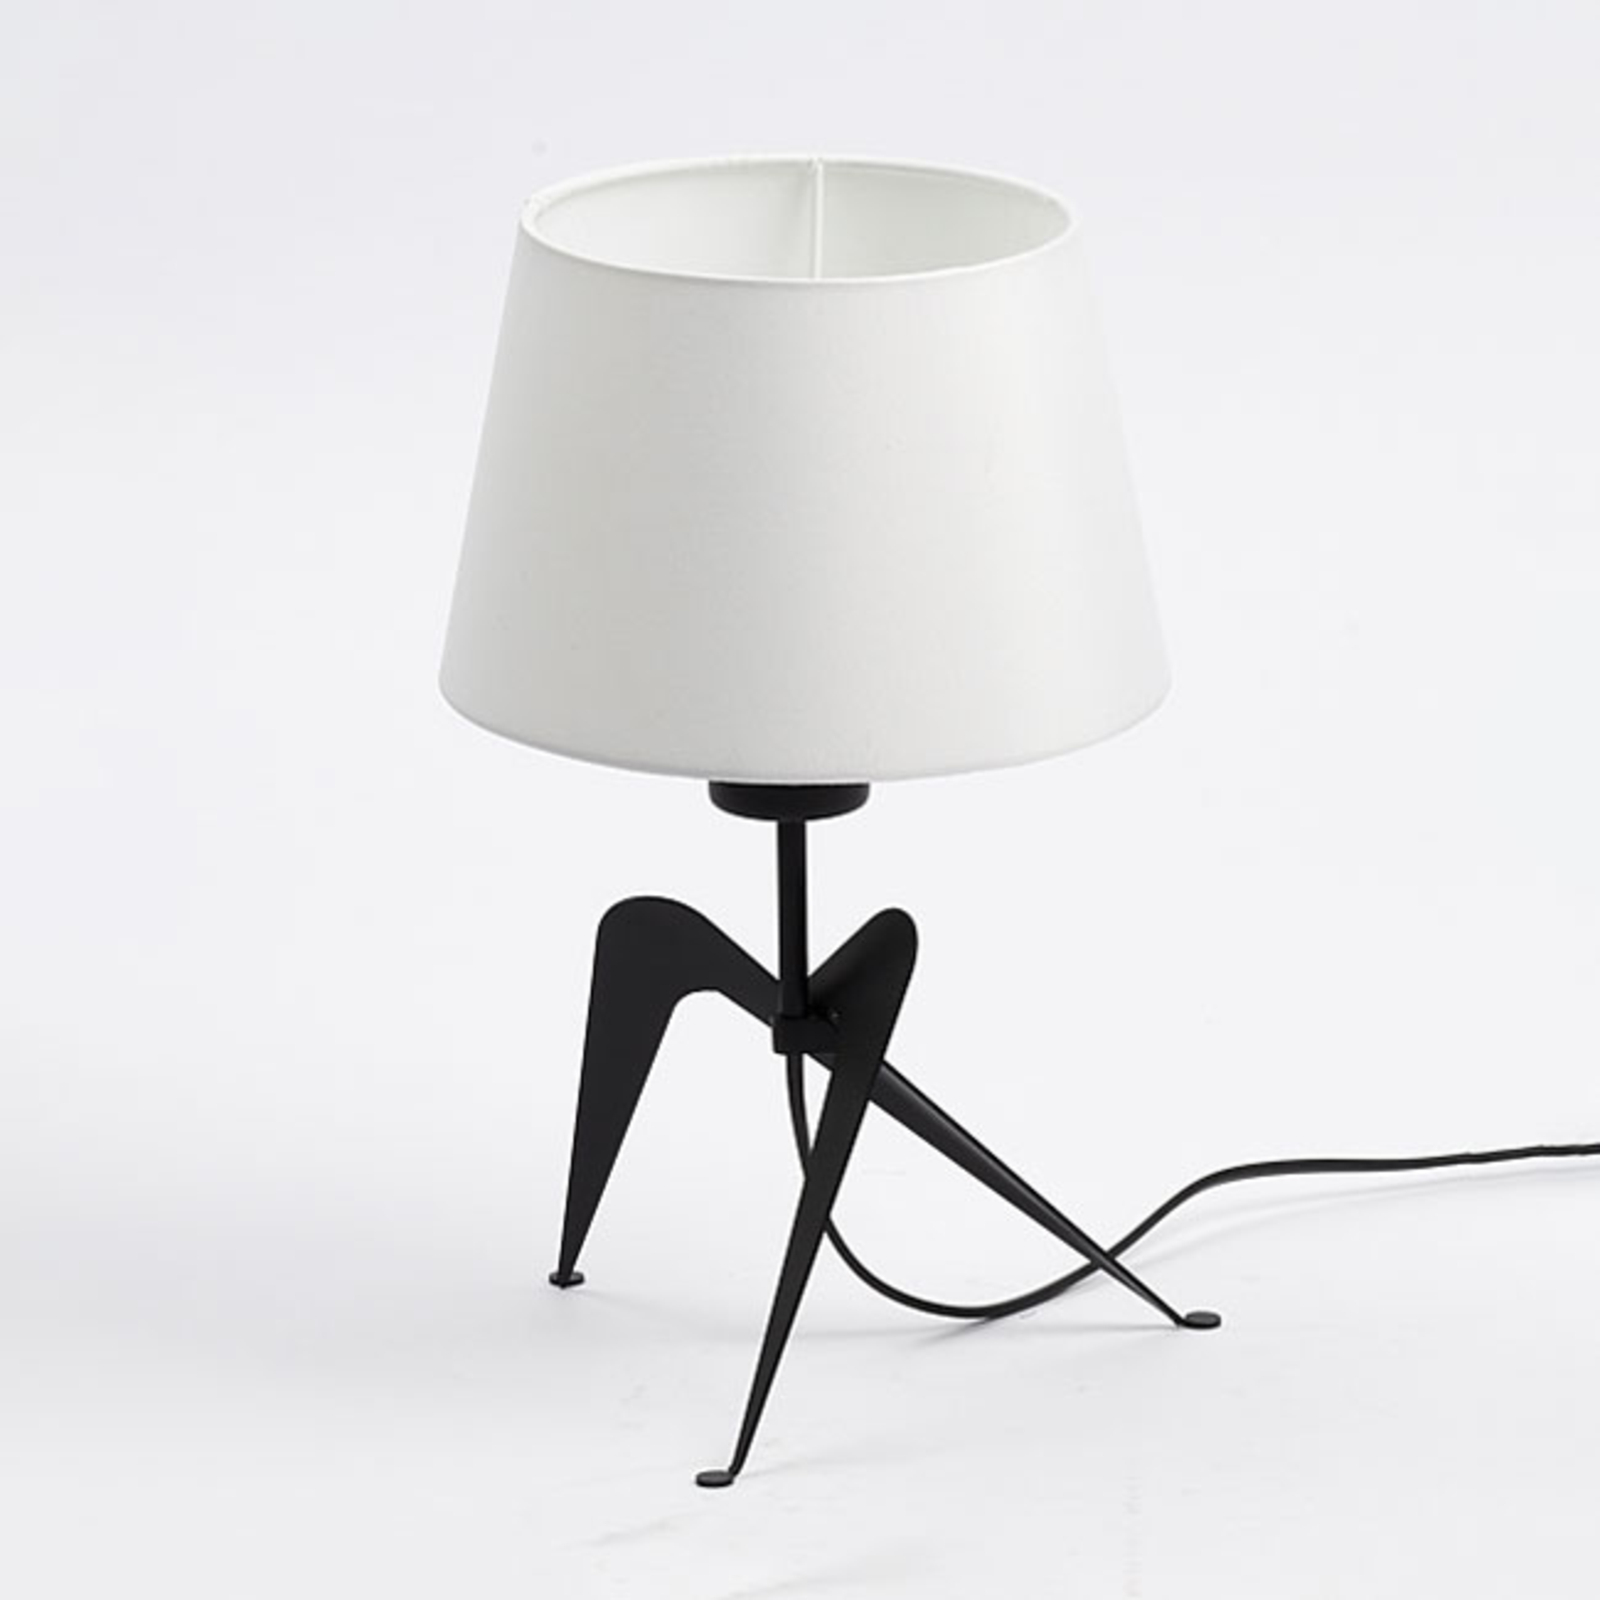 Lola table lamp, fabric lampshade, black and white